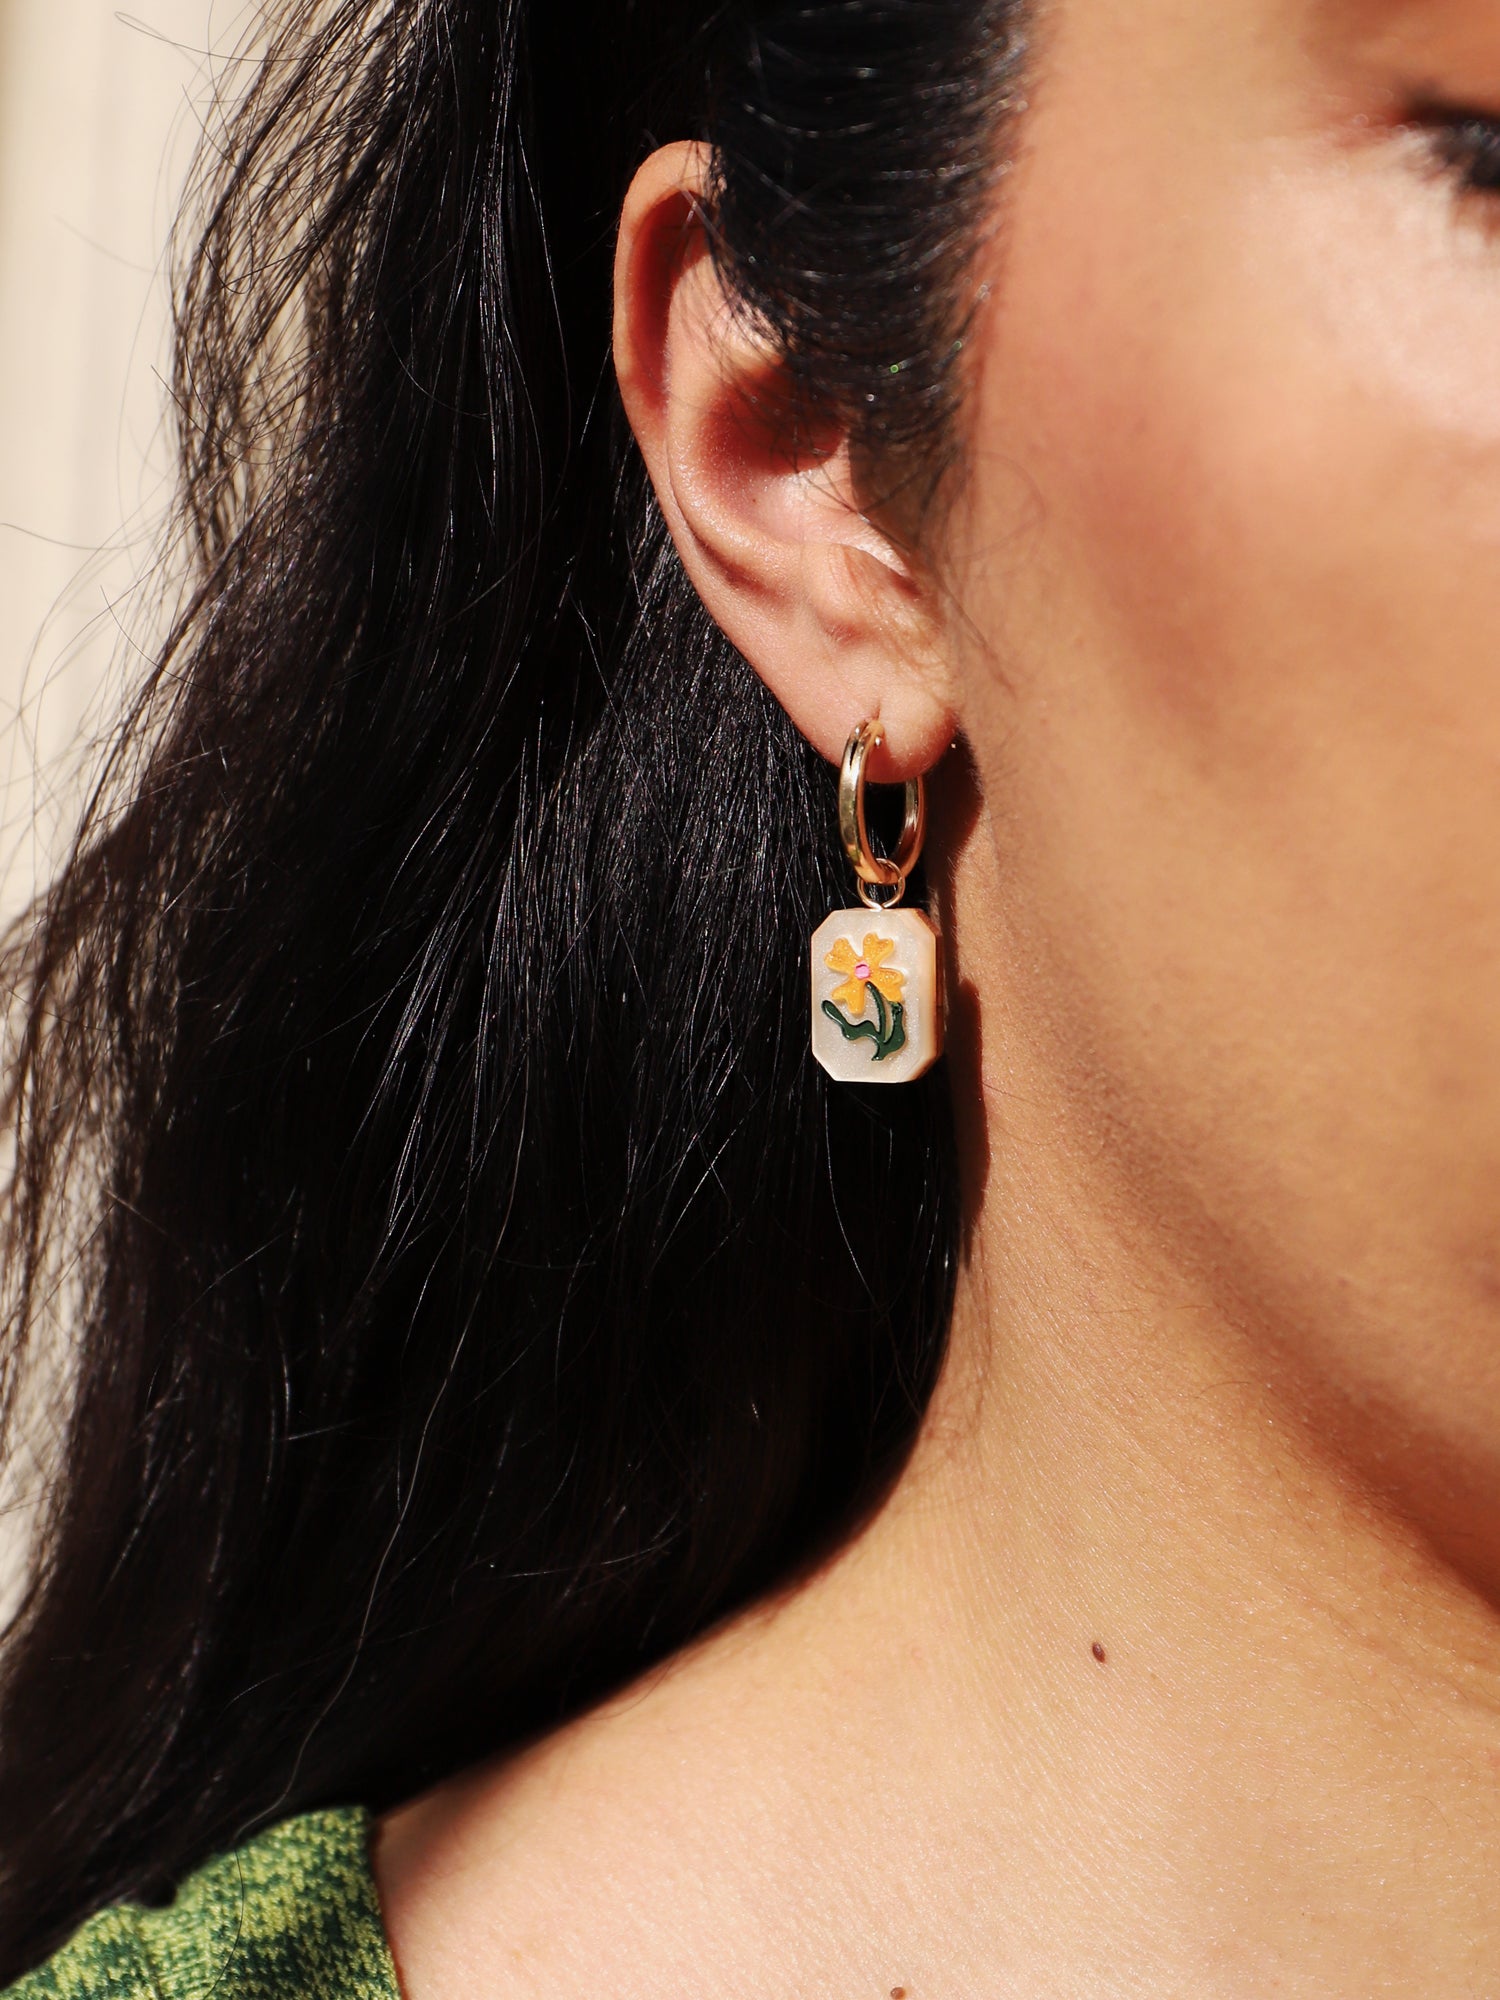 Flower charm hoop earrings. Made from acrylic and 14k gold-filled hoops & findings.  Handmade in the UK by Wolf & Moon.